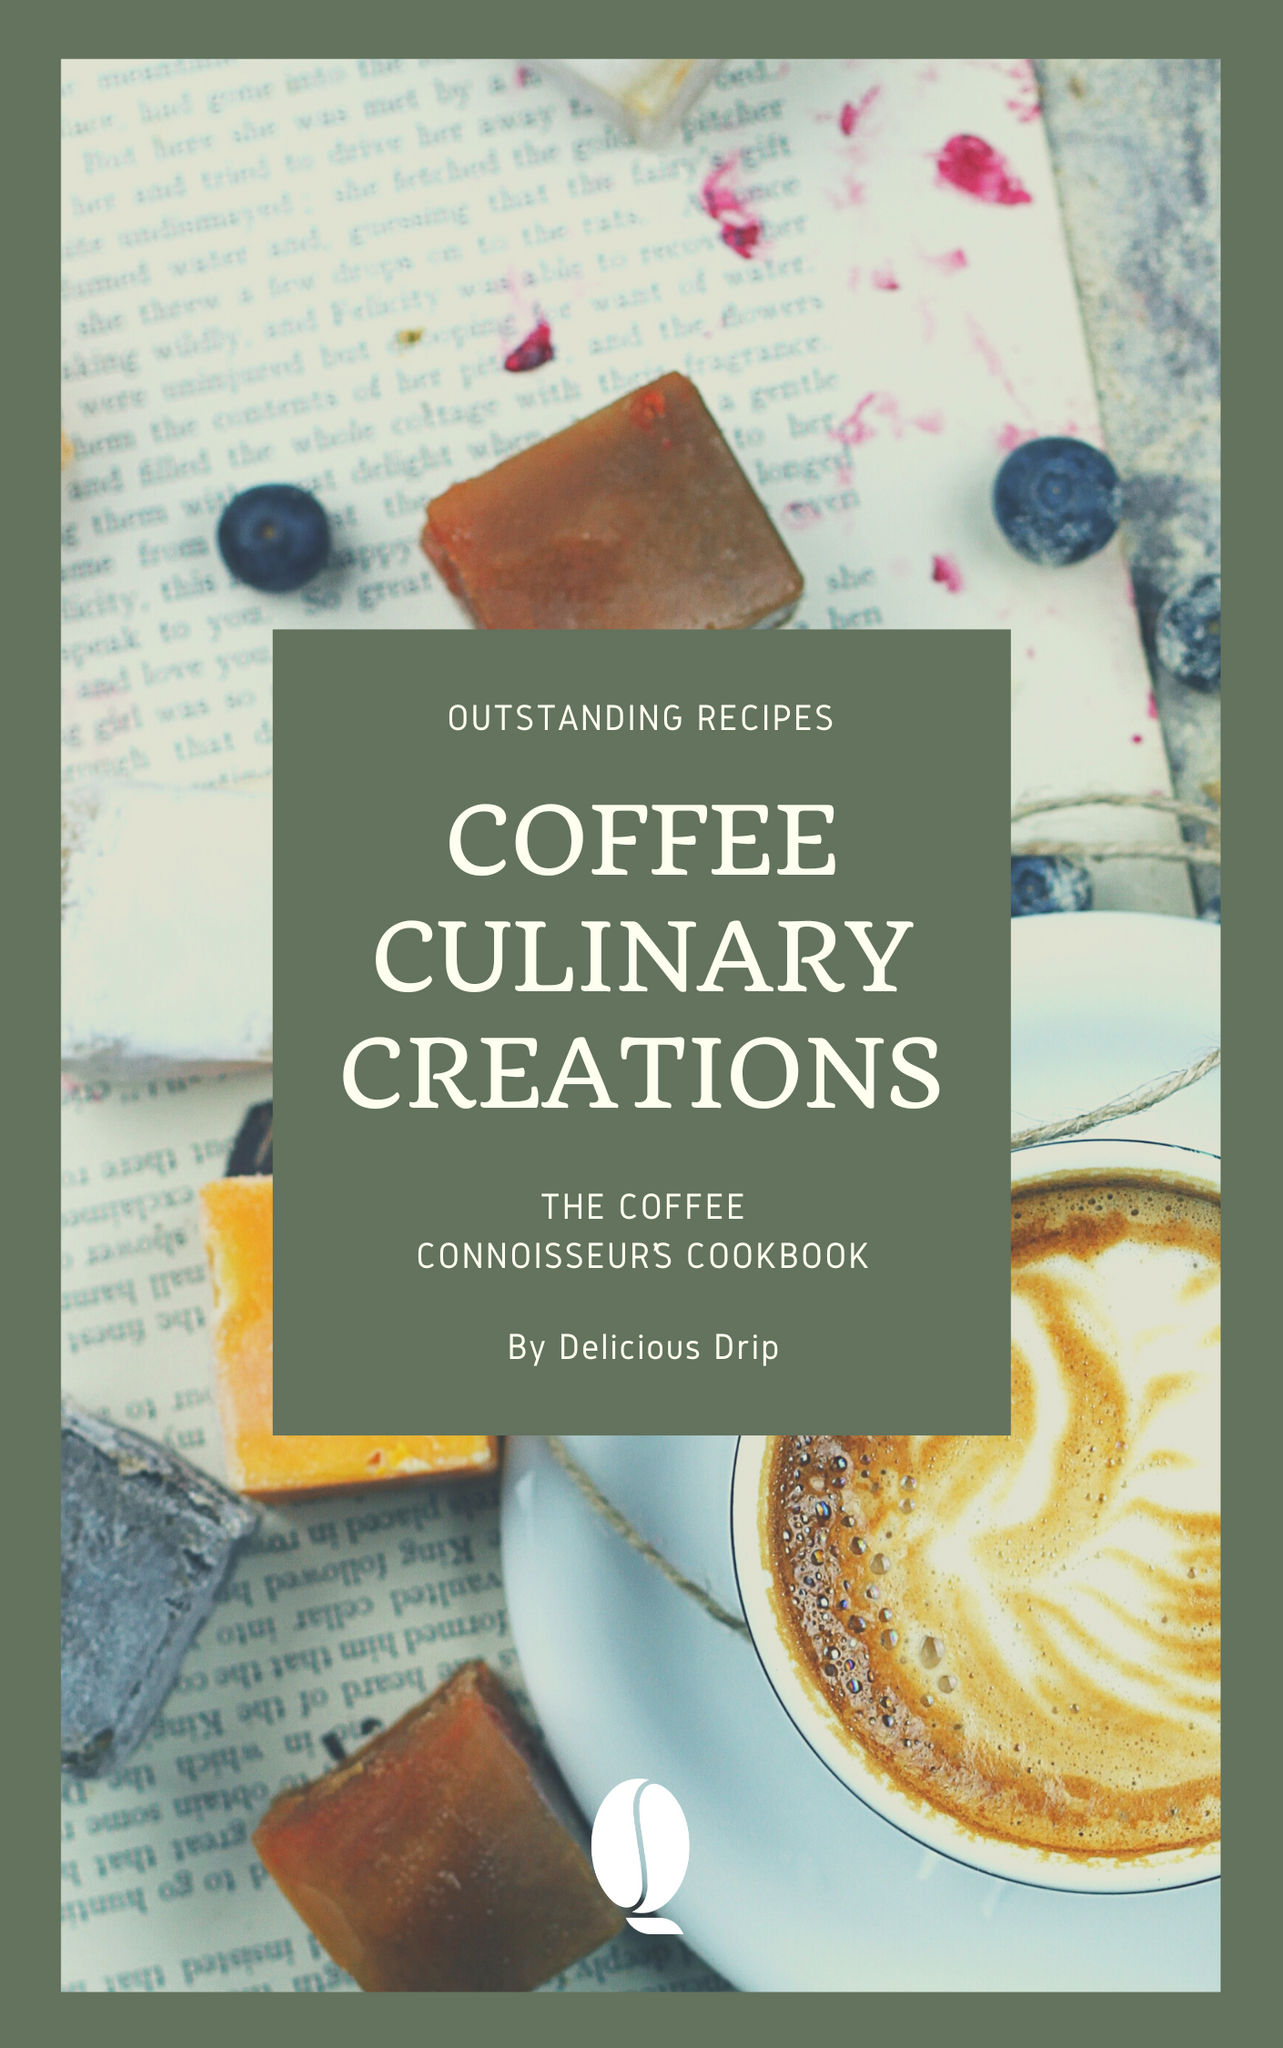 Coffee Culinary Creations: A Coffee Lover's Guide to Sensational Sips